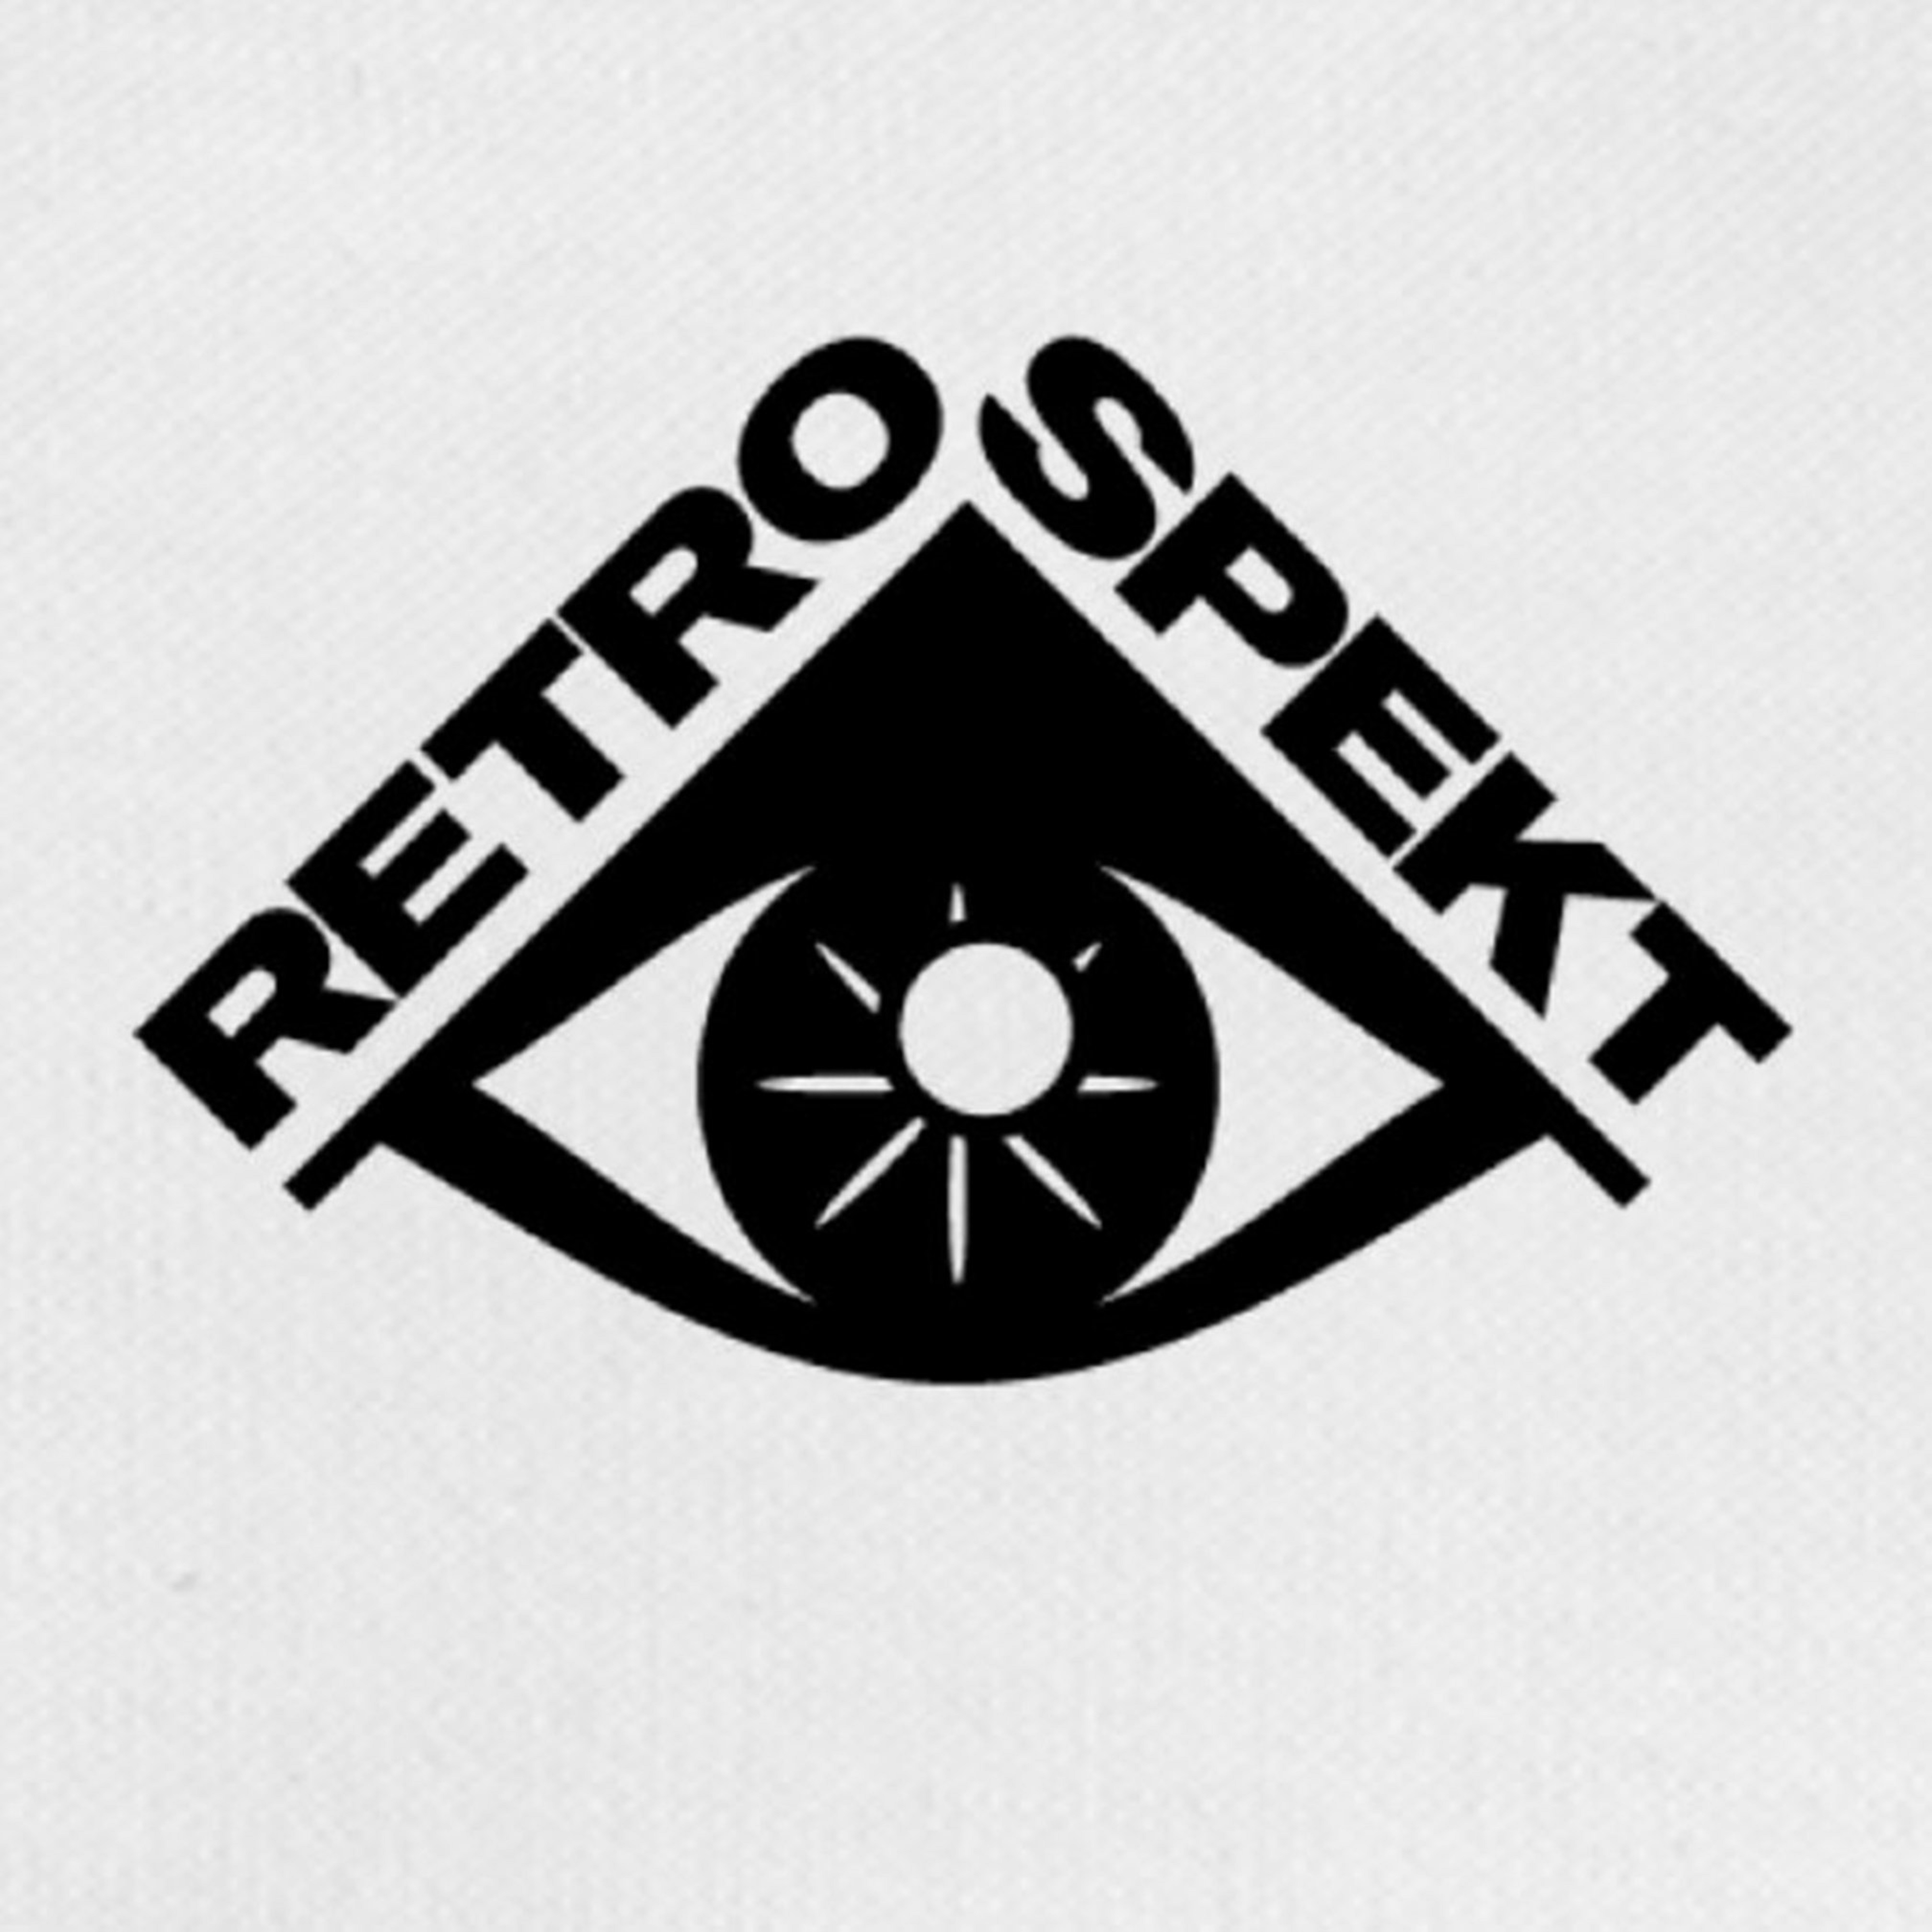 Retrospekt, A Two-Day Hybrid Festival Streams from Downtown L.A. to Benefit Creatives